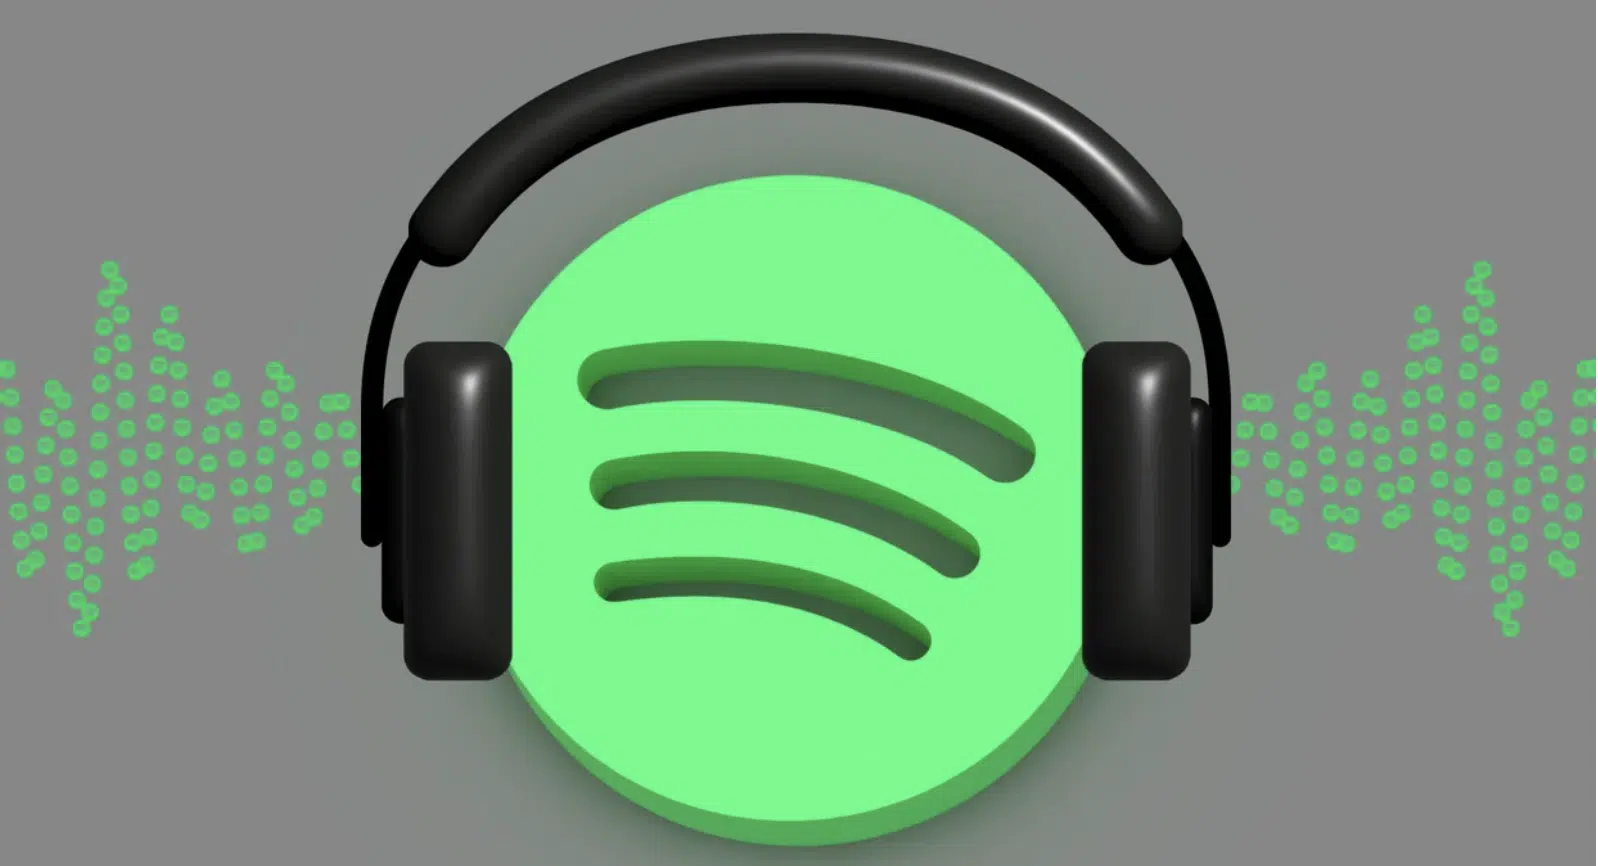 Learn how to upload music to Spotify